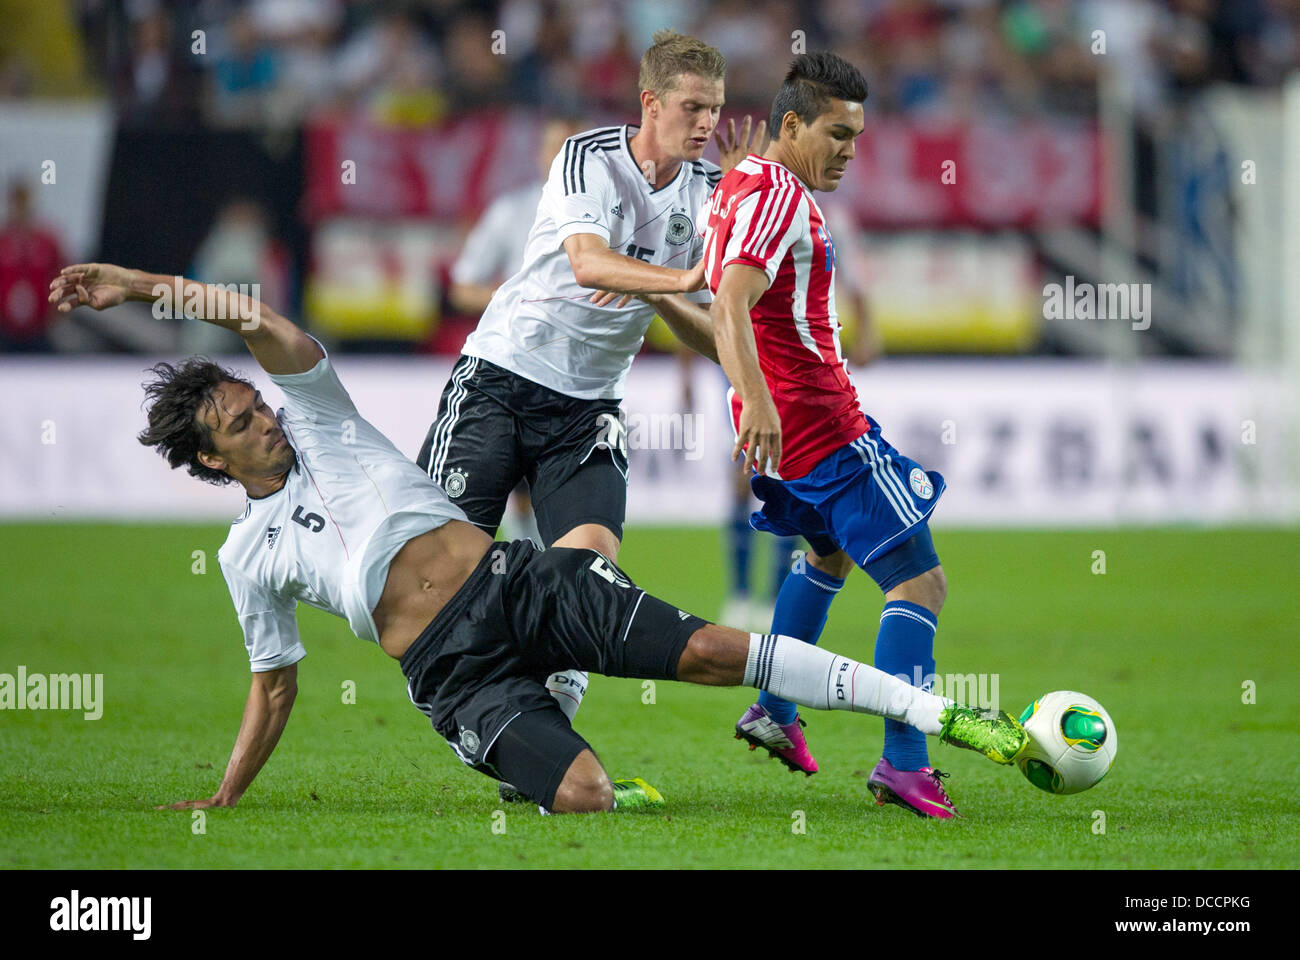 Kaiserslautern, Germany. 14th Aug, 2013. Germany's Mats Hummels (L) and Lars Bender (M) and Paraguay's Jorge Rojas vie for the ball during the international friendly soccer match between Germany vs Paraguay at the Fritz-Walter-Stadium in Kaiserslautern, Germany, 14 August 2013. Photo: Uwe Anspach/dpa/Alamy Live News Stock Photo